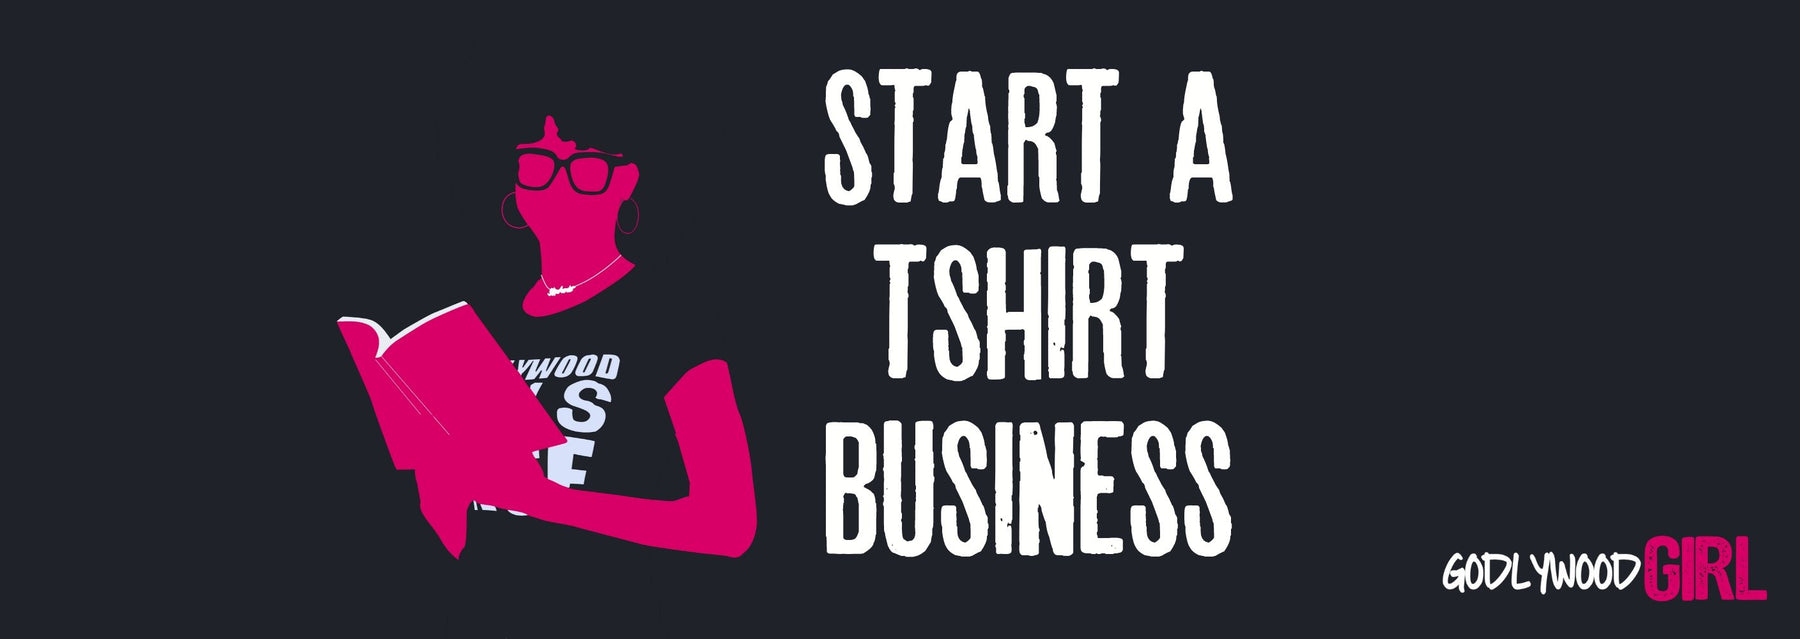 START YOUR T-SHIRT BUSINESS WITH $0 IN 2019 (Christian Entrepreneur Series)